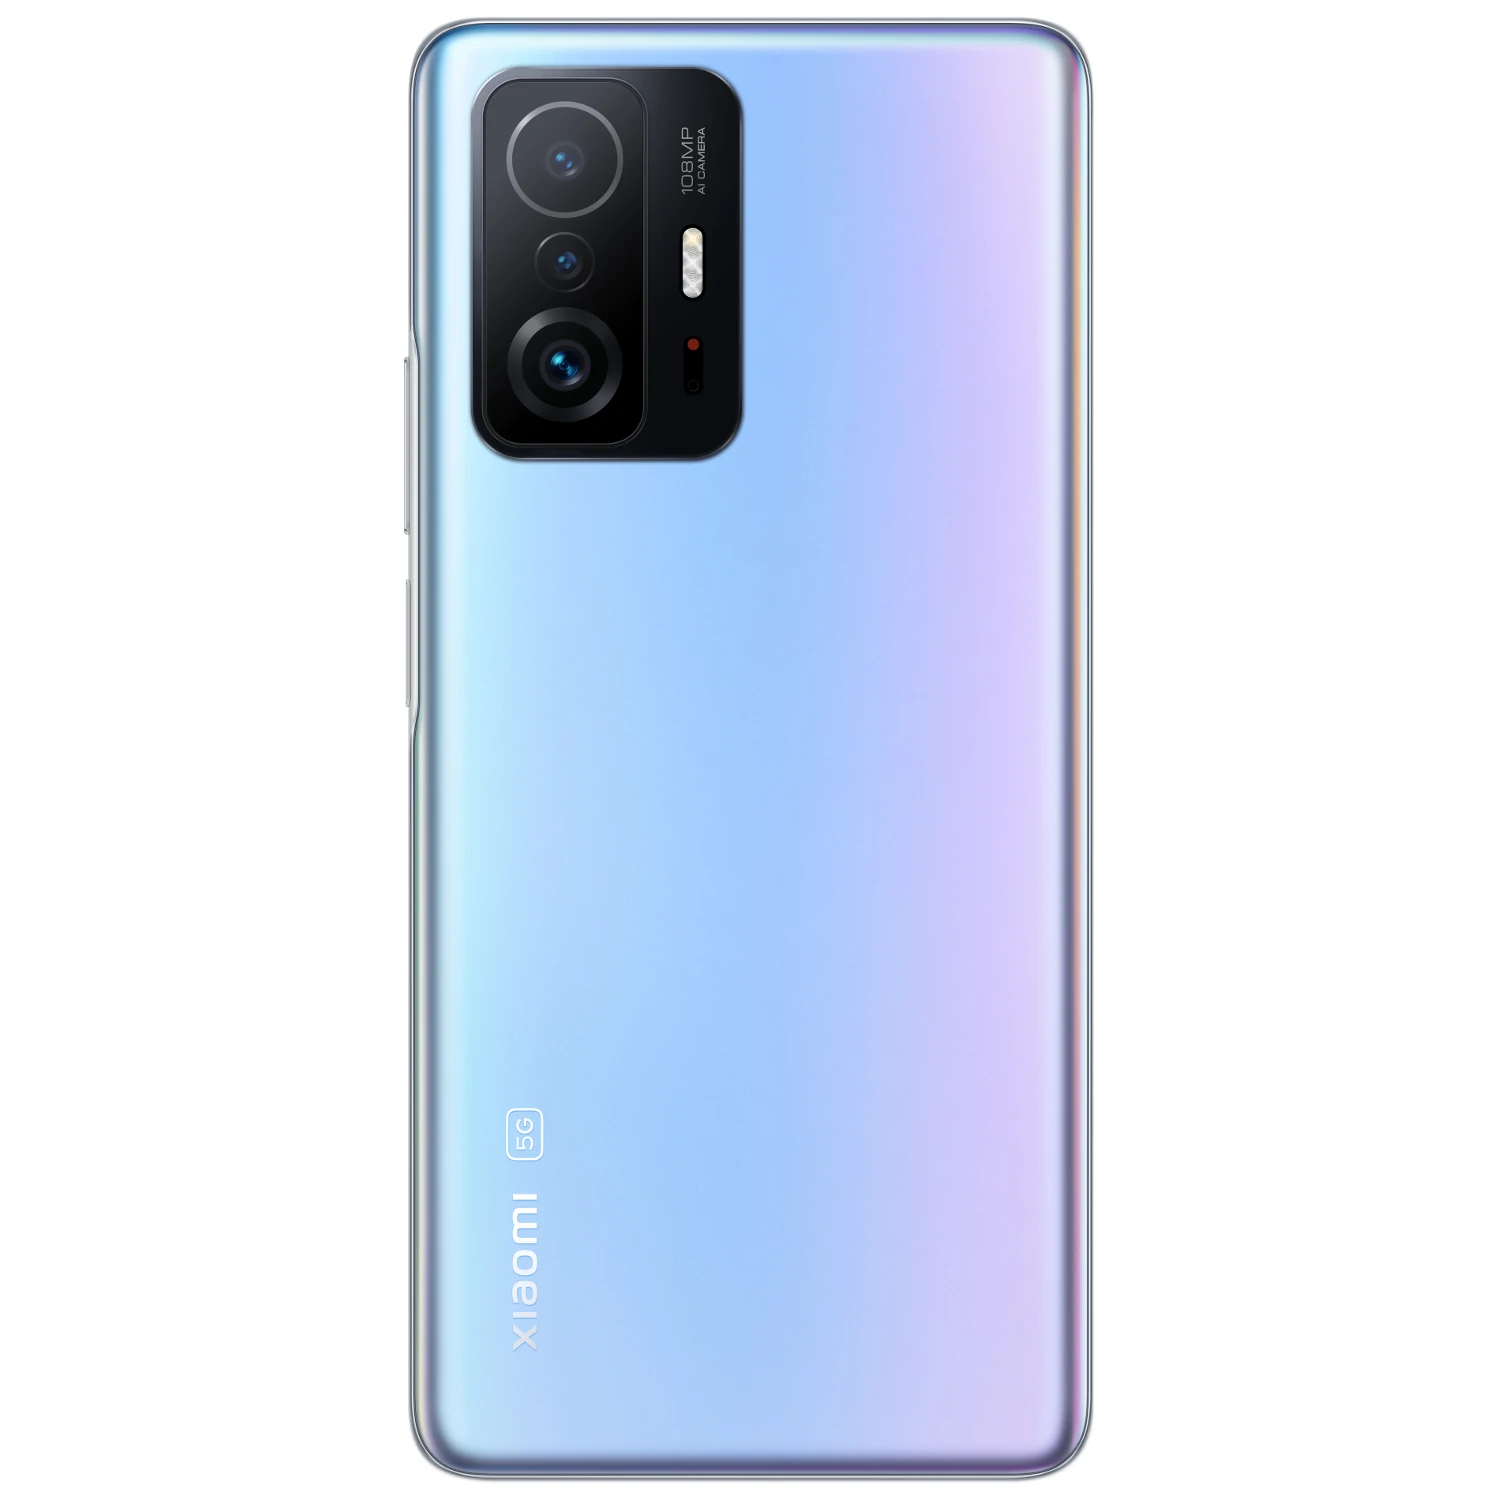 Find Xiaomi 11T Pro Global Version 120W Fast Charge 108MP Triple Camera 8GB 128GB Snapdragon 888 6 67 inch 120Hz AMOLED NFC Octa Core 5G Smartphone for Sale on Gipsybee.com